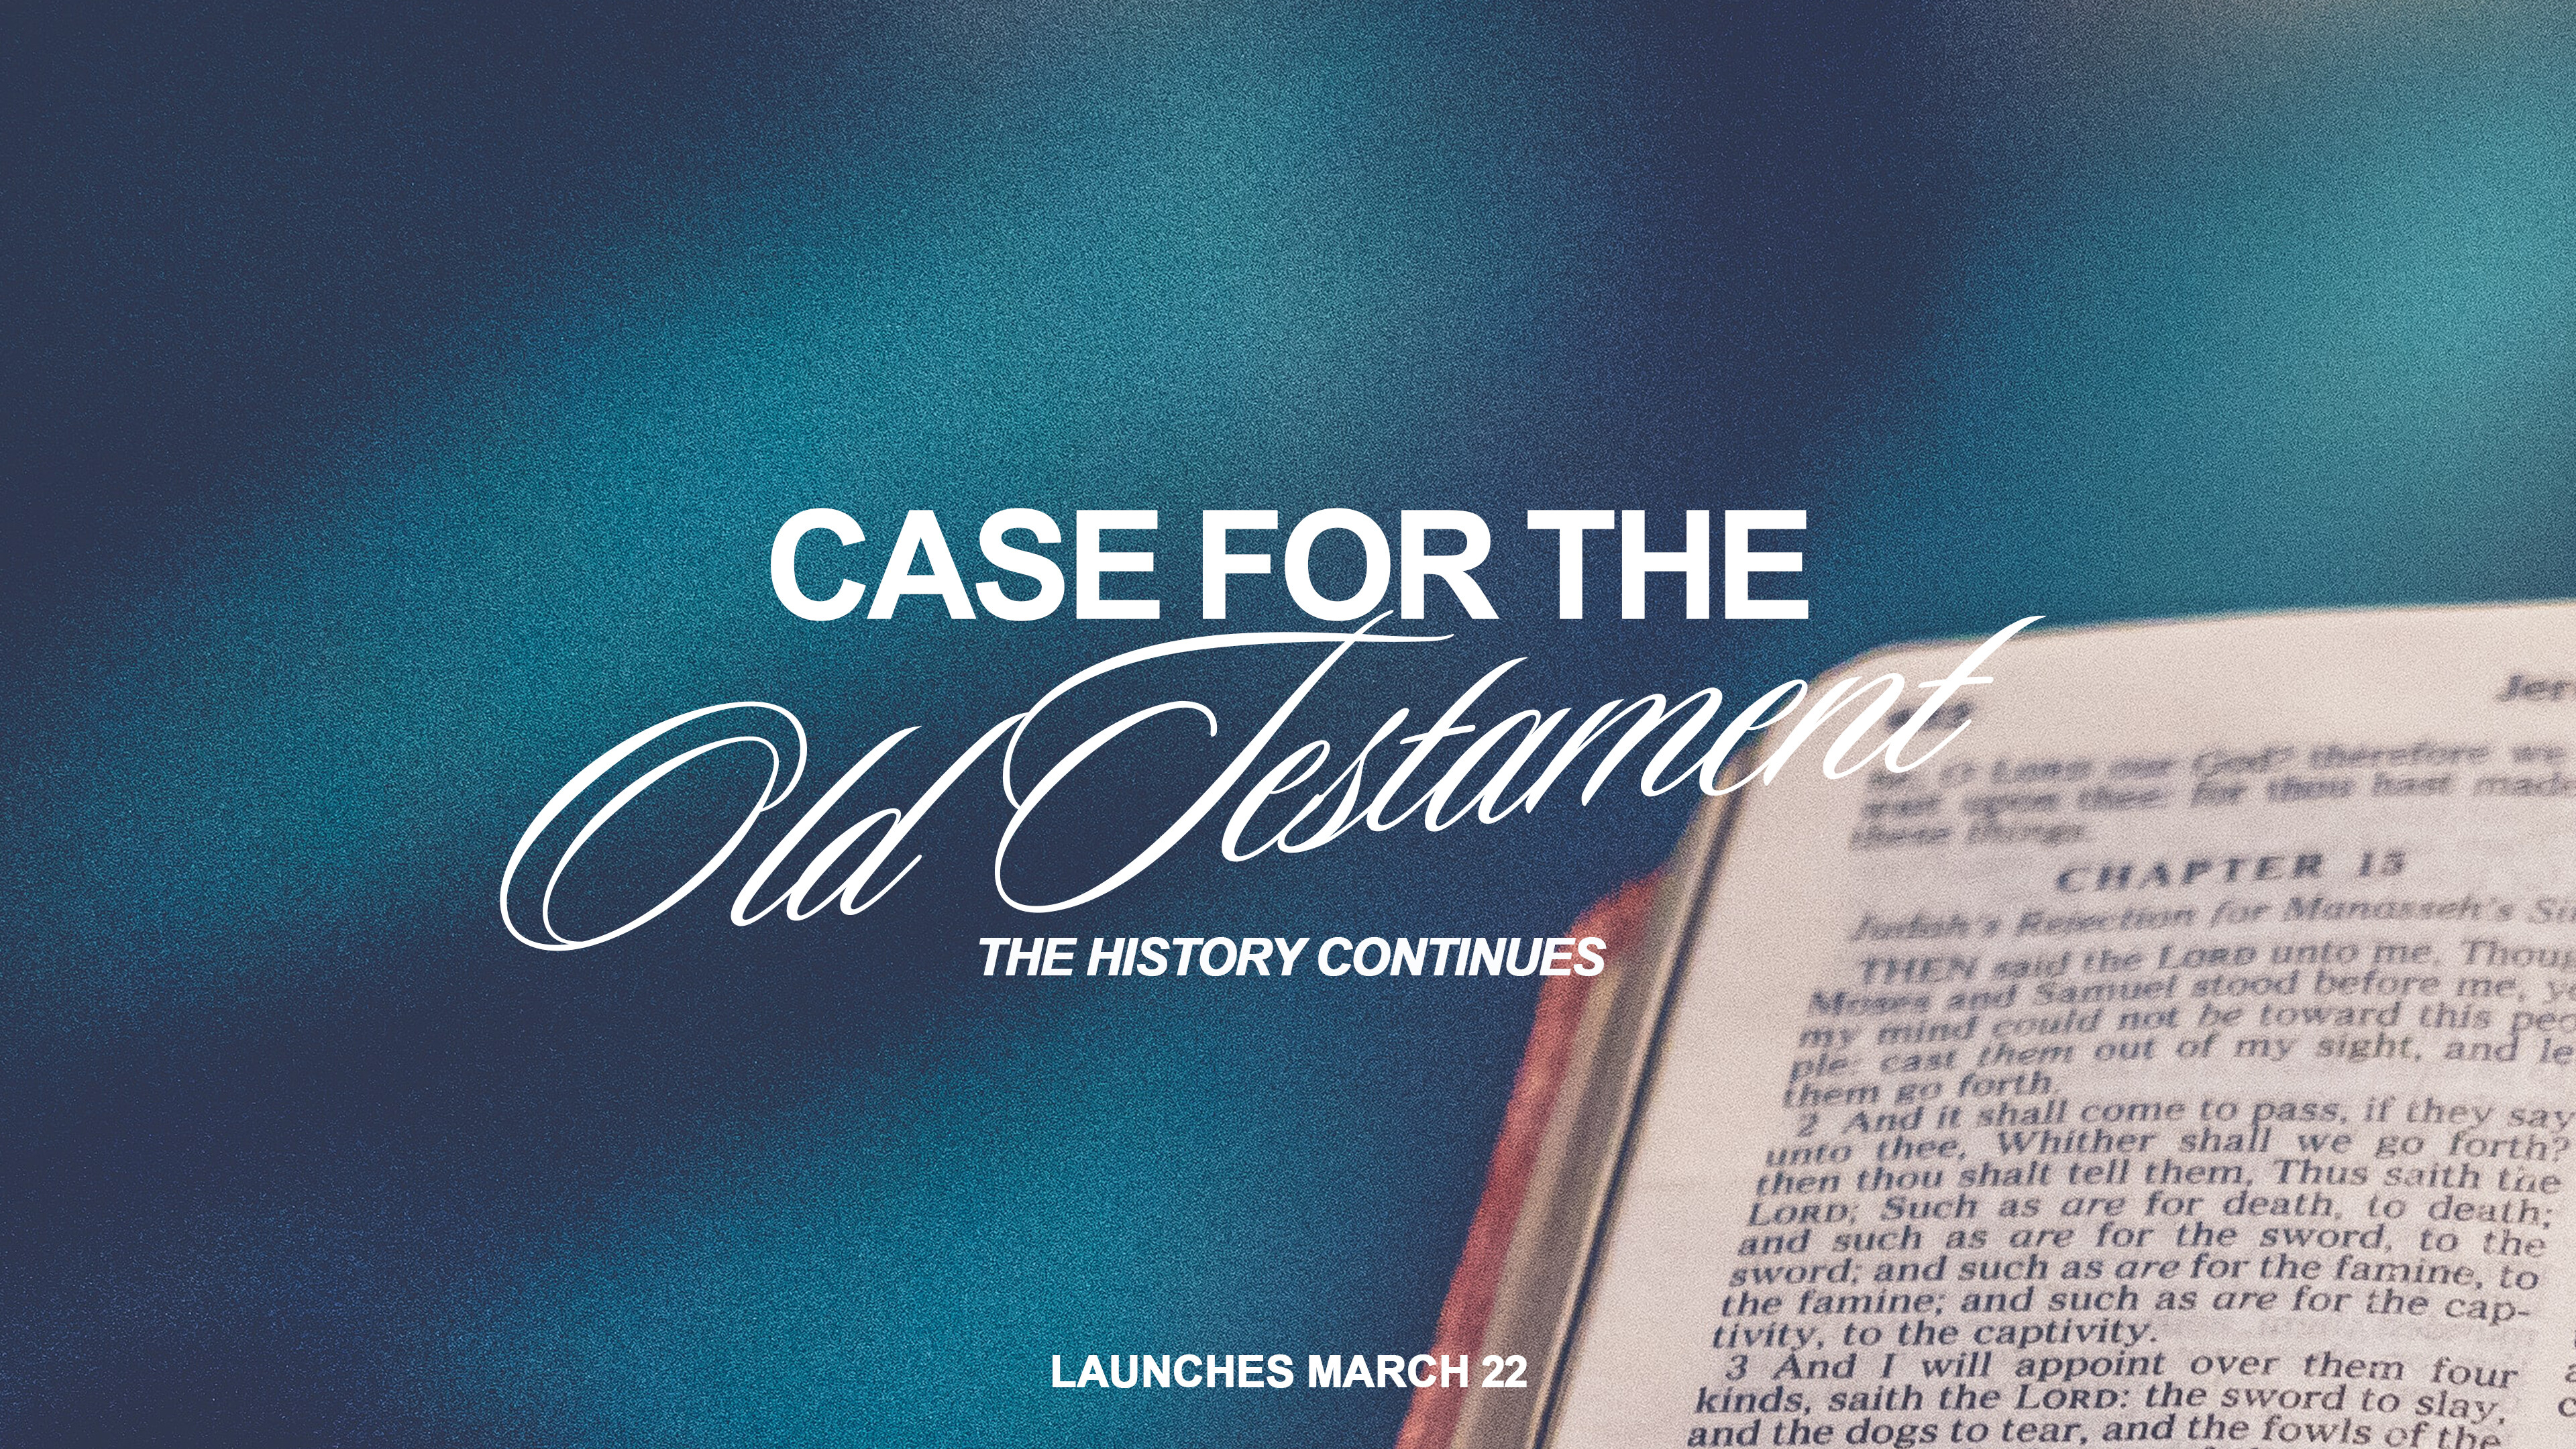 Case for the Old Testament: History Continues